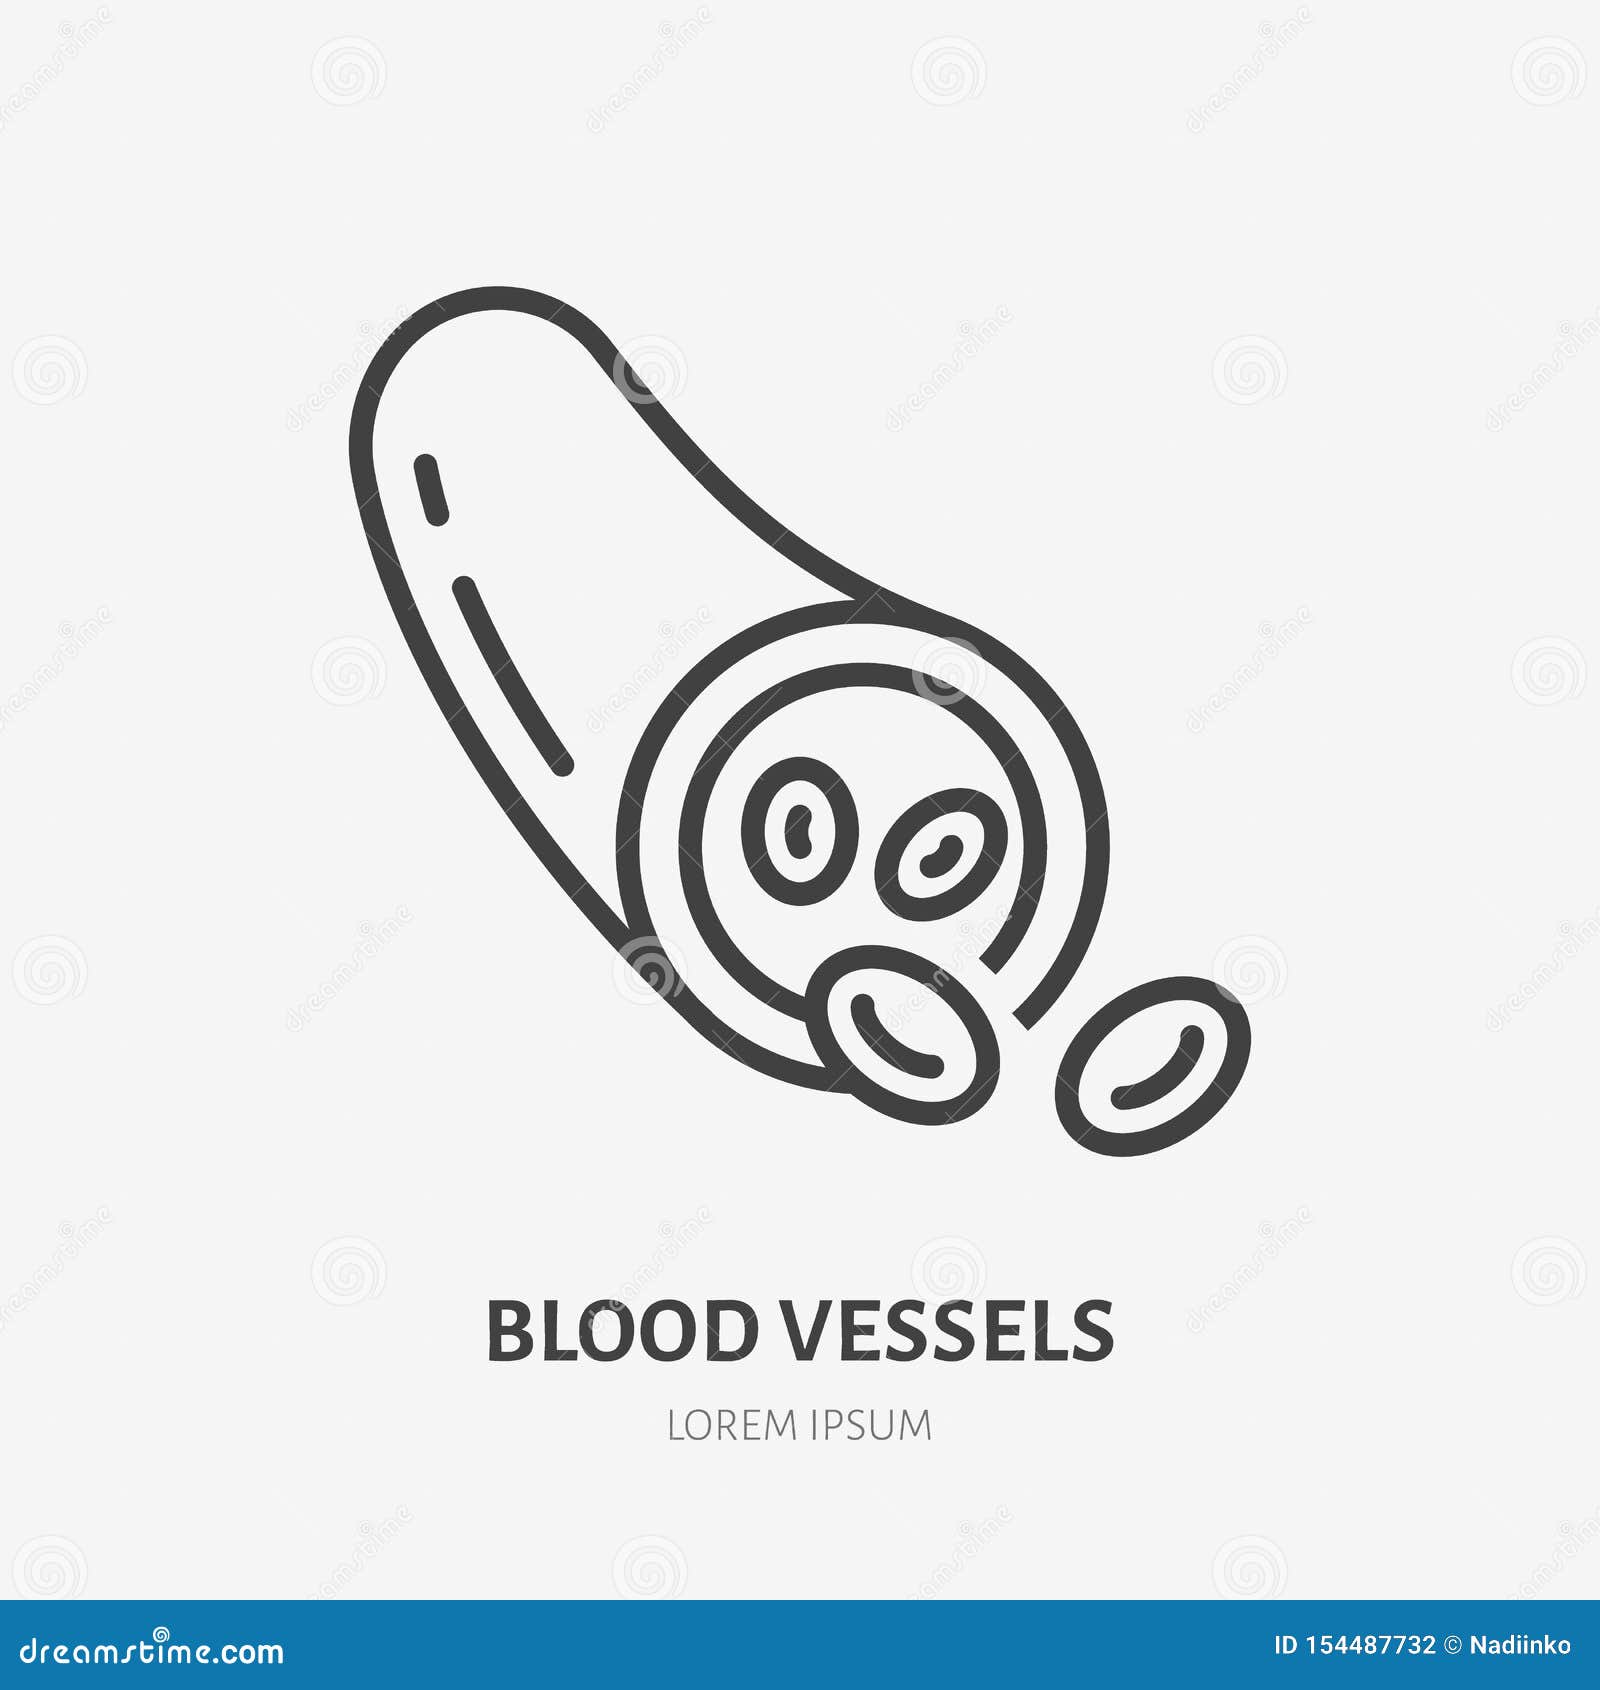 blood vessel flat line icon.  thin pictogram of vein with molecules, outline  for hematology clinic